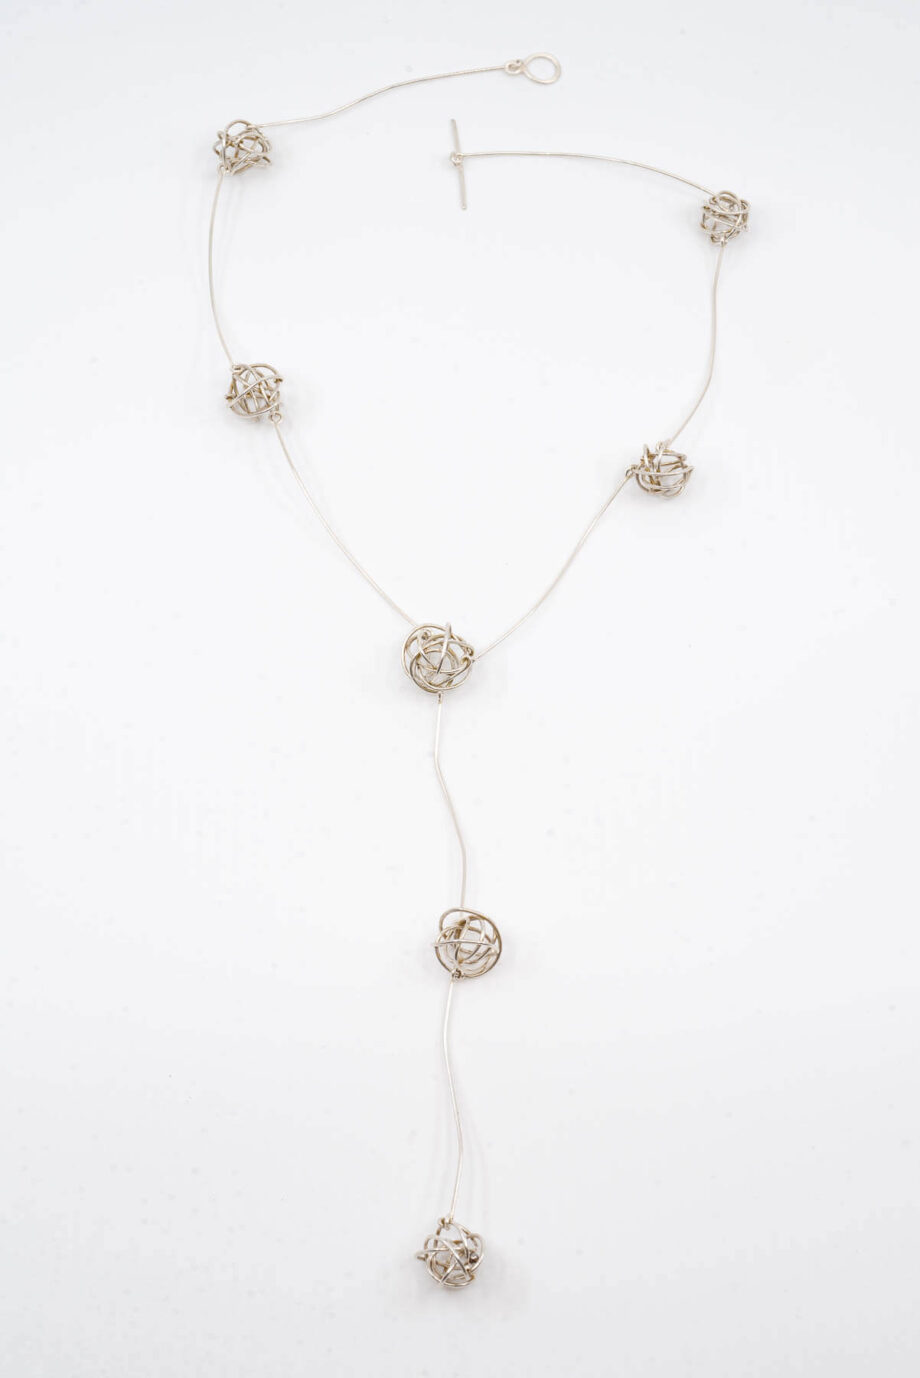 Marilena Synthesis Necklace 72 311